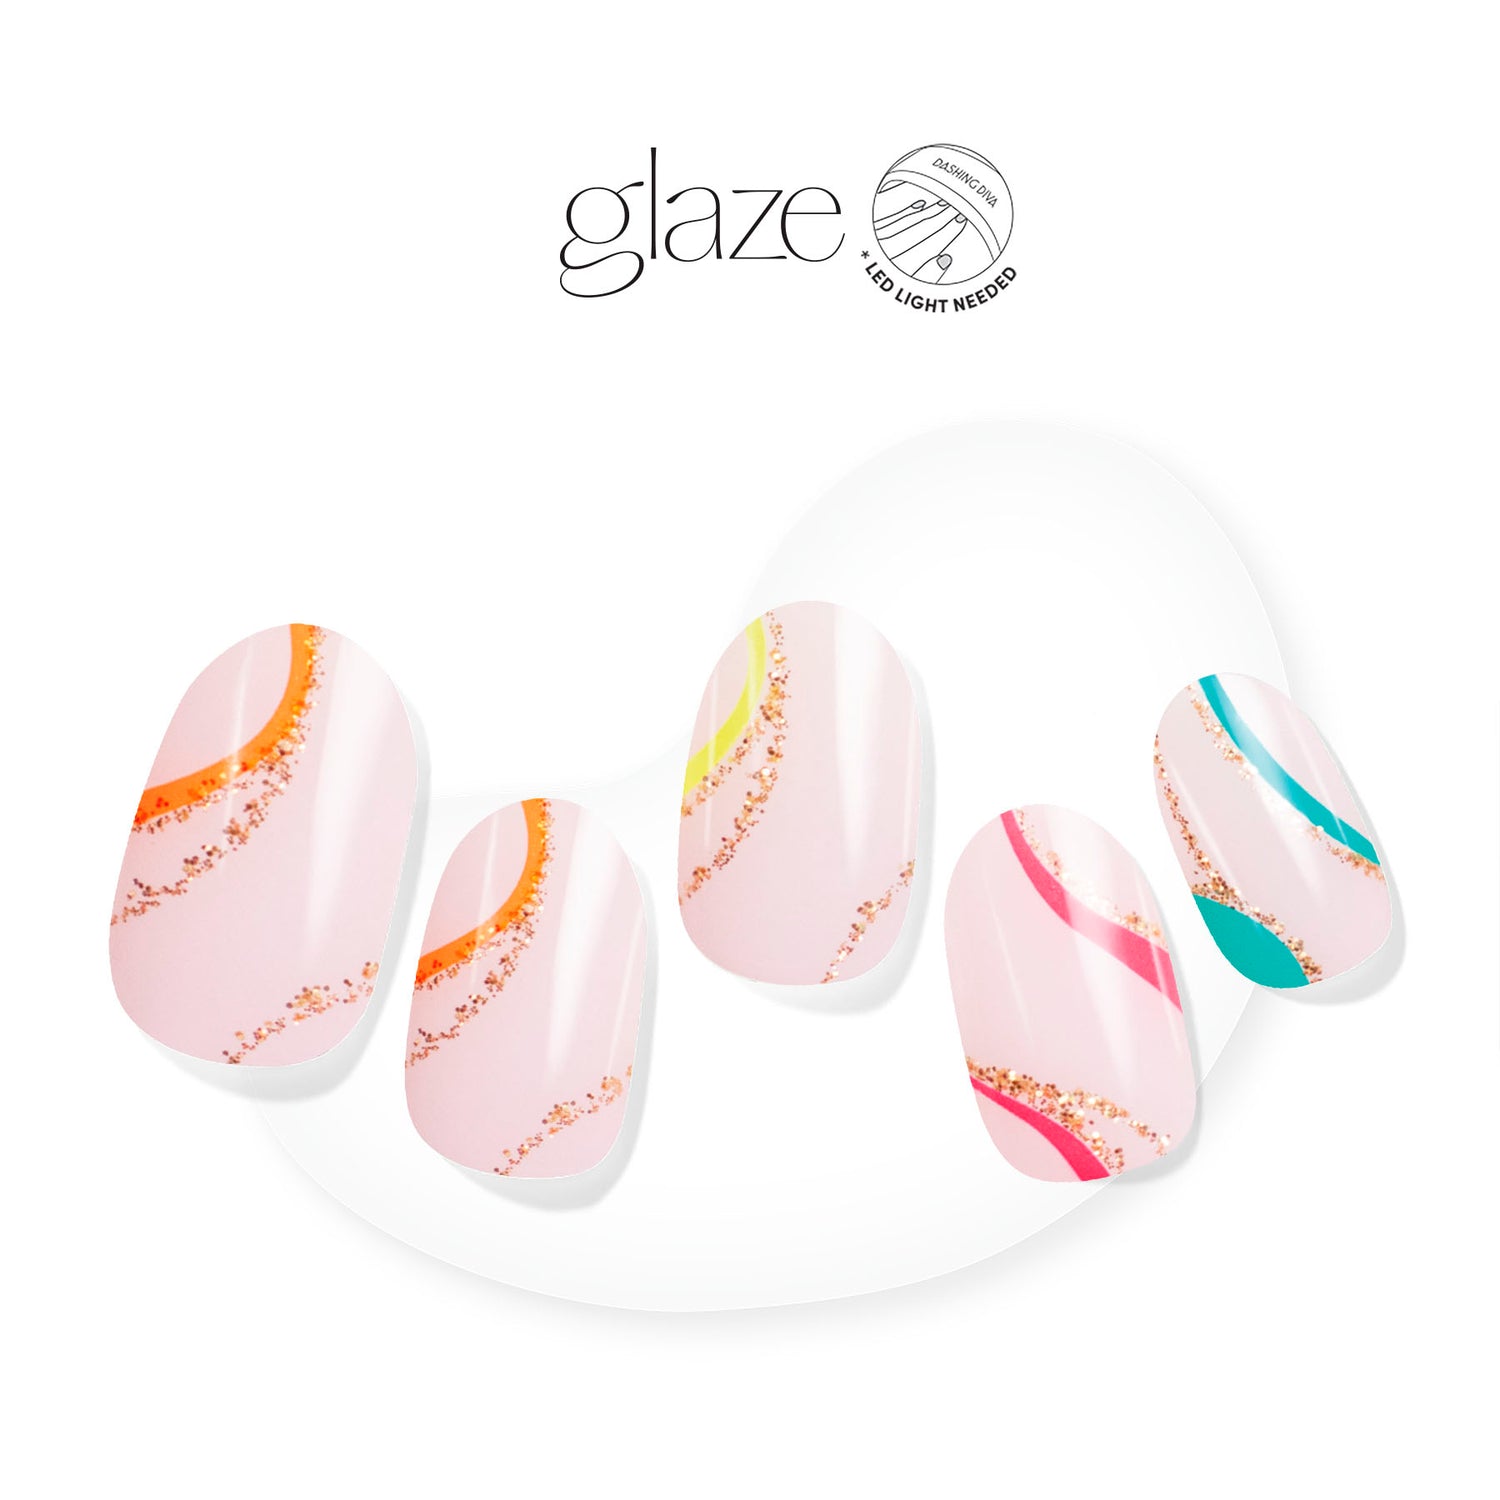 Sheer, nude pink gel nail strips featuring neon, multicolor swirls & gold glitter with mega volume and maximum shine.